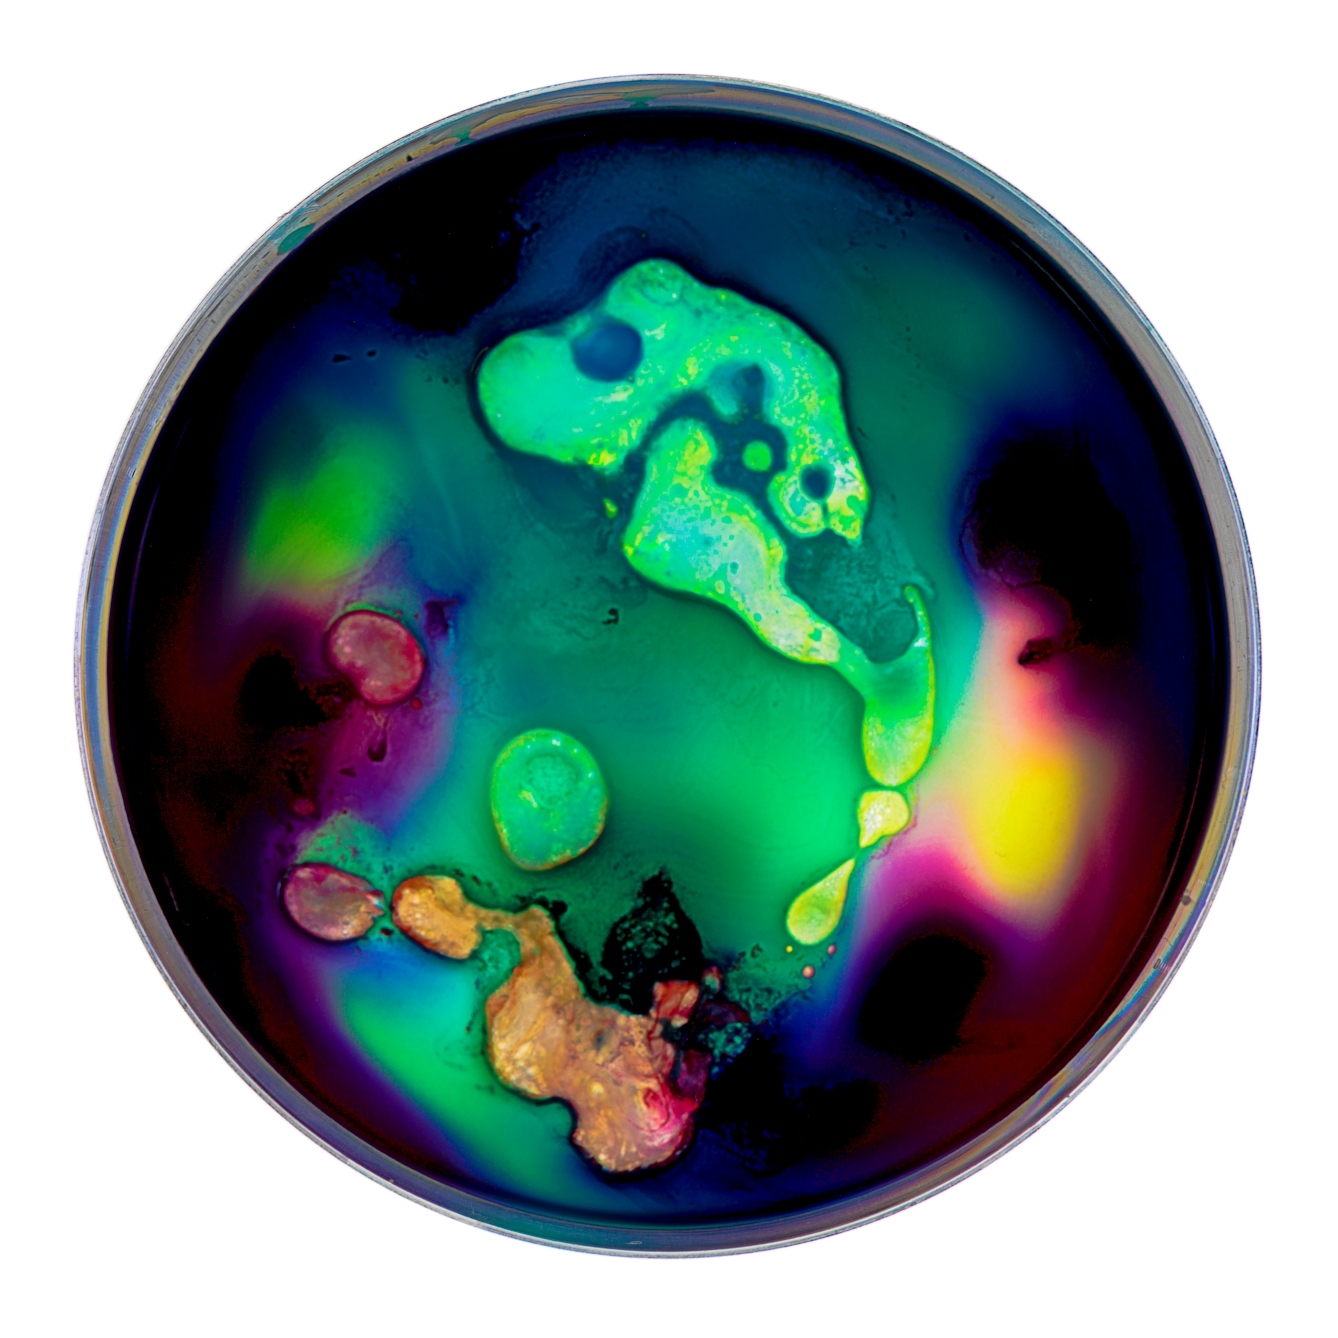 Photograph of a petri dish containing colourful swirls of blue, yellow, orange, purples and violets, made from ink, watercolour, pva and resin.